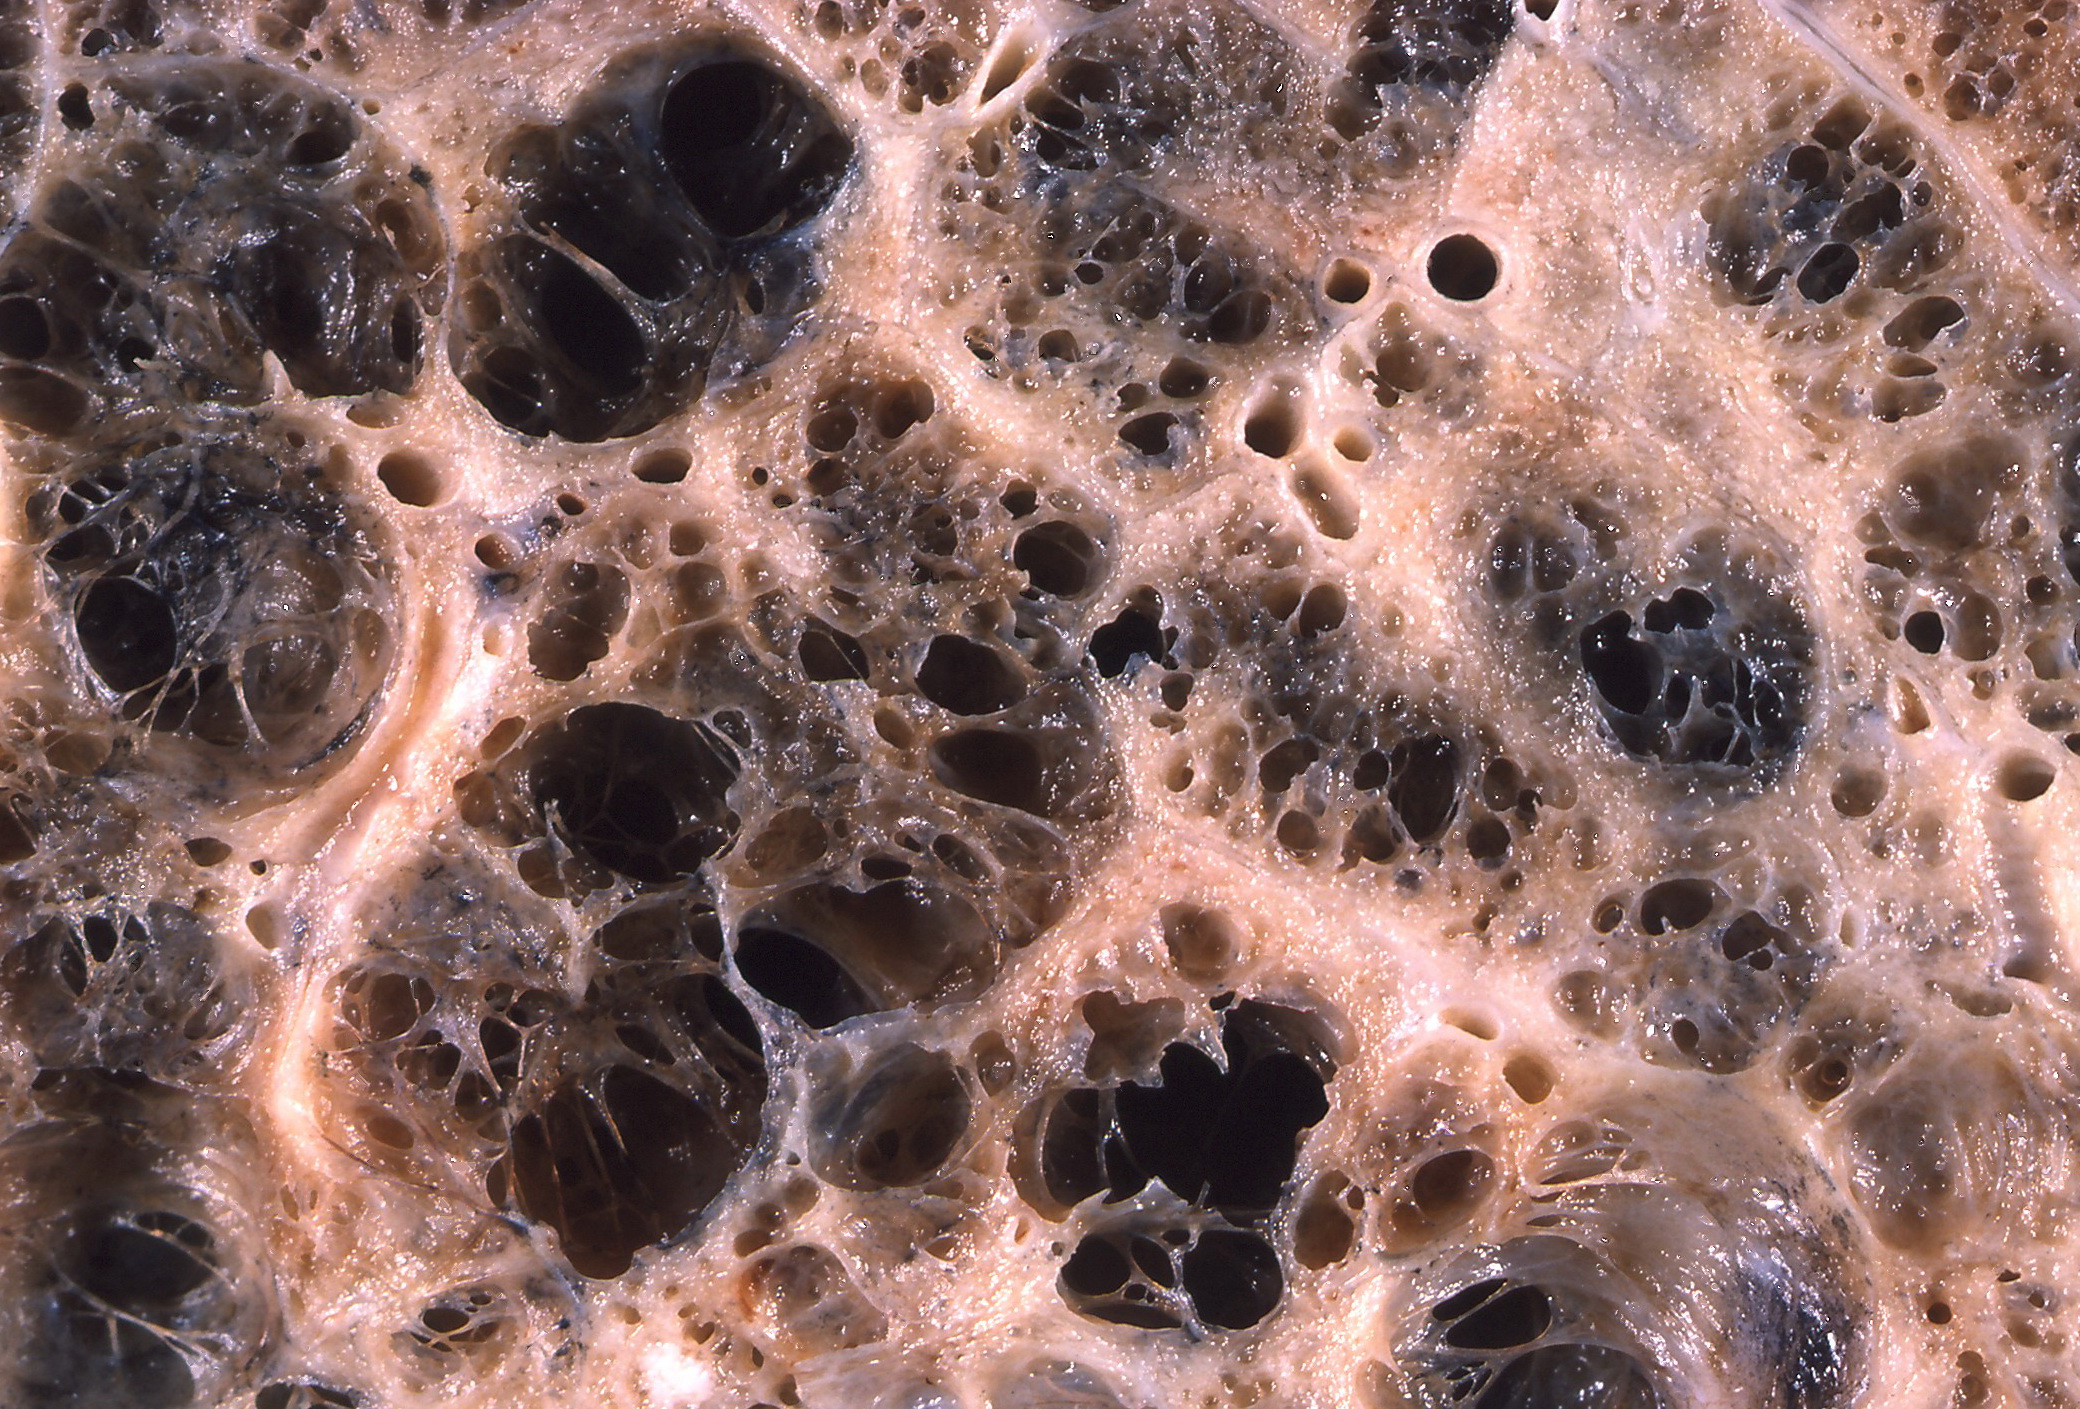 Emphysematous lung parenchyma (image from Wikipedia)